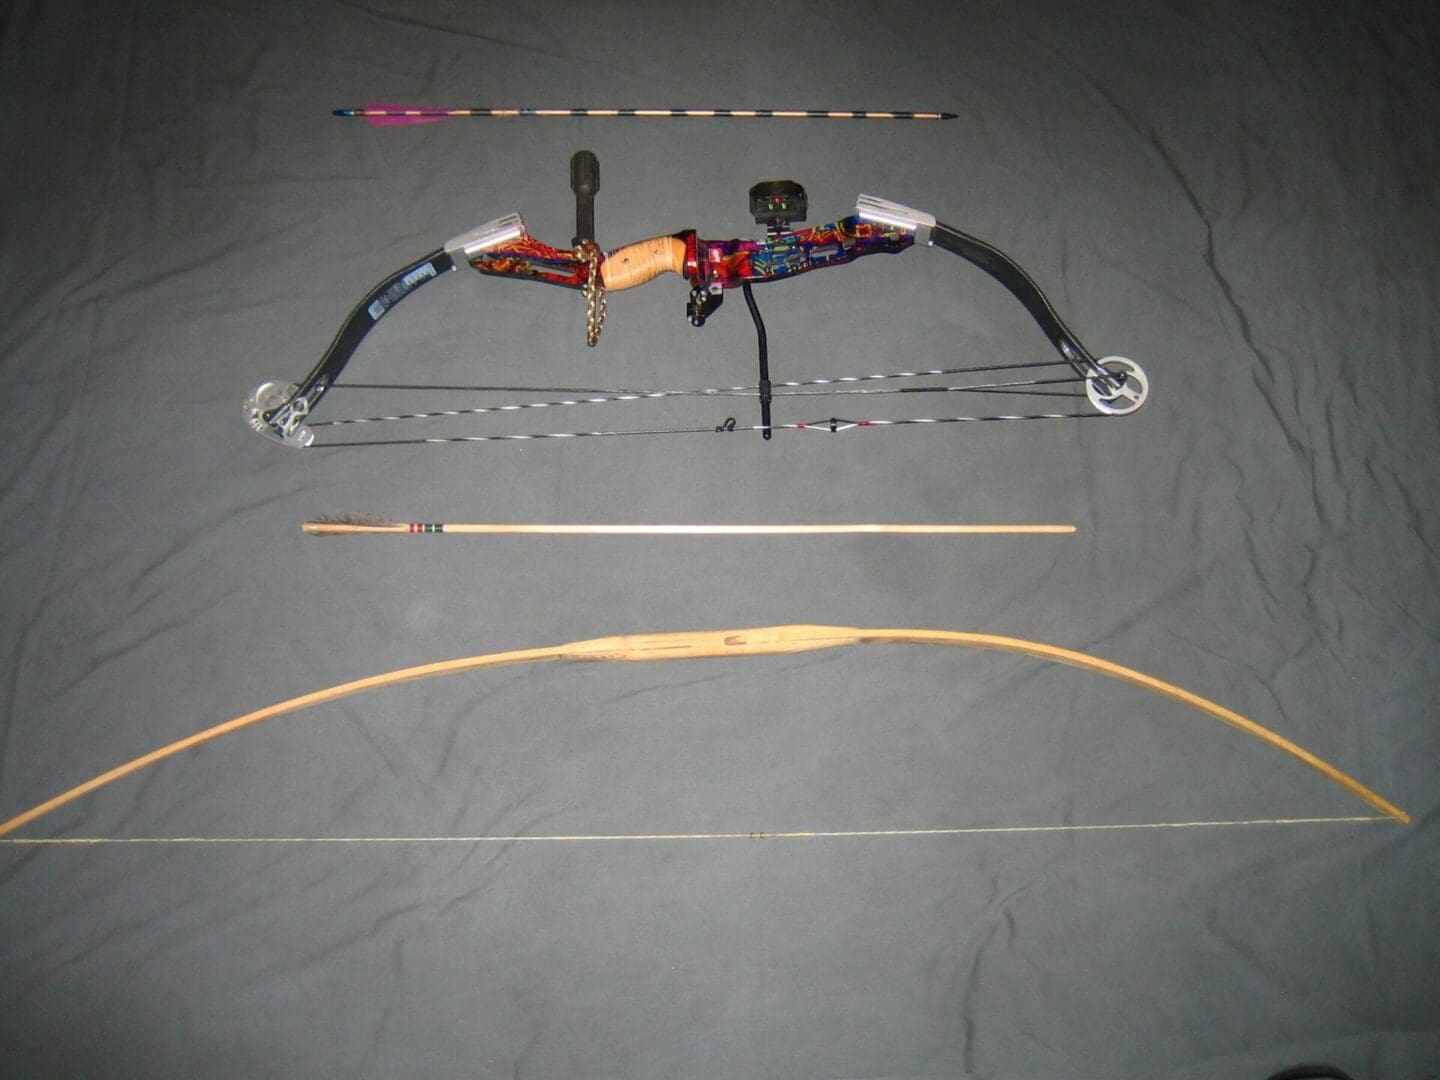 A bow and arrows are laying on the ground.